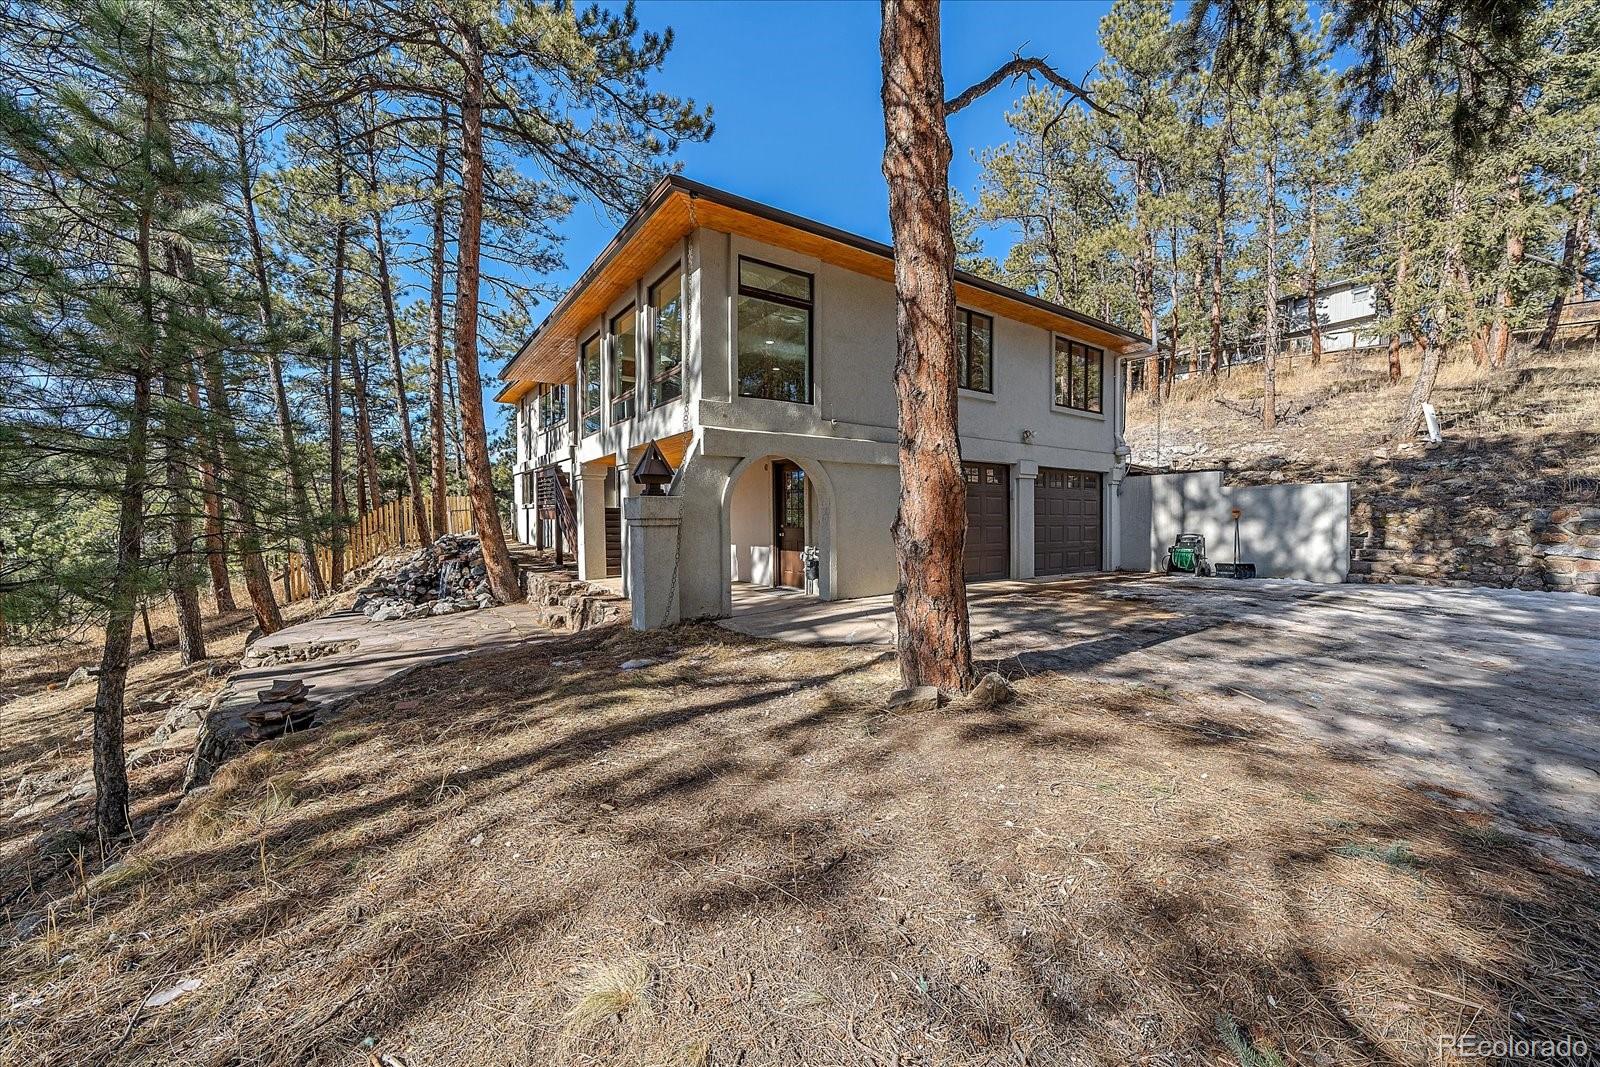 4193 s fir circle, evergreen sold home. Closed on 2024-04-05 for $1,200,000.